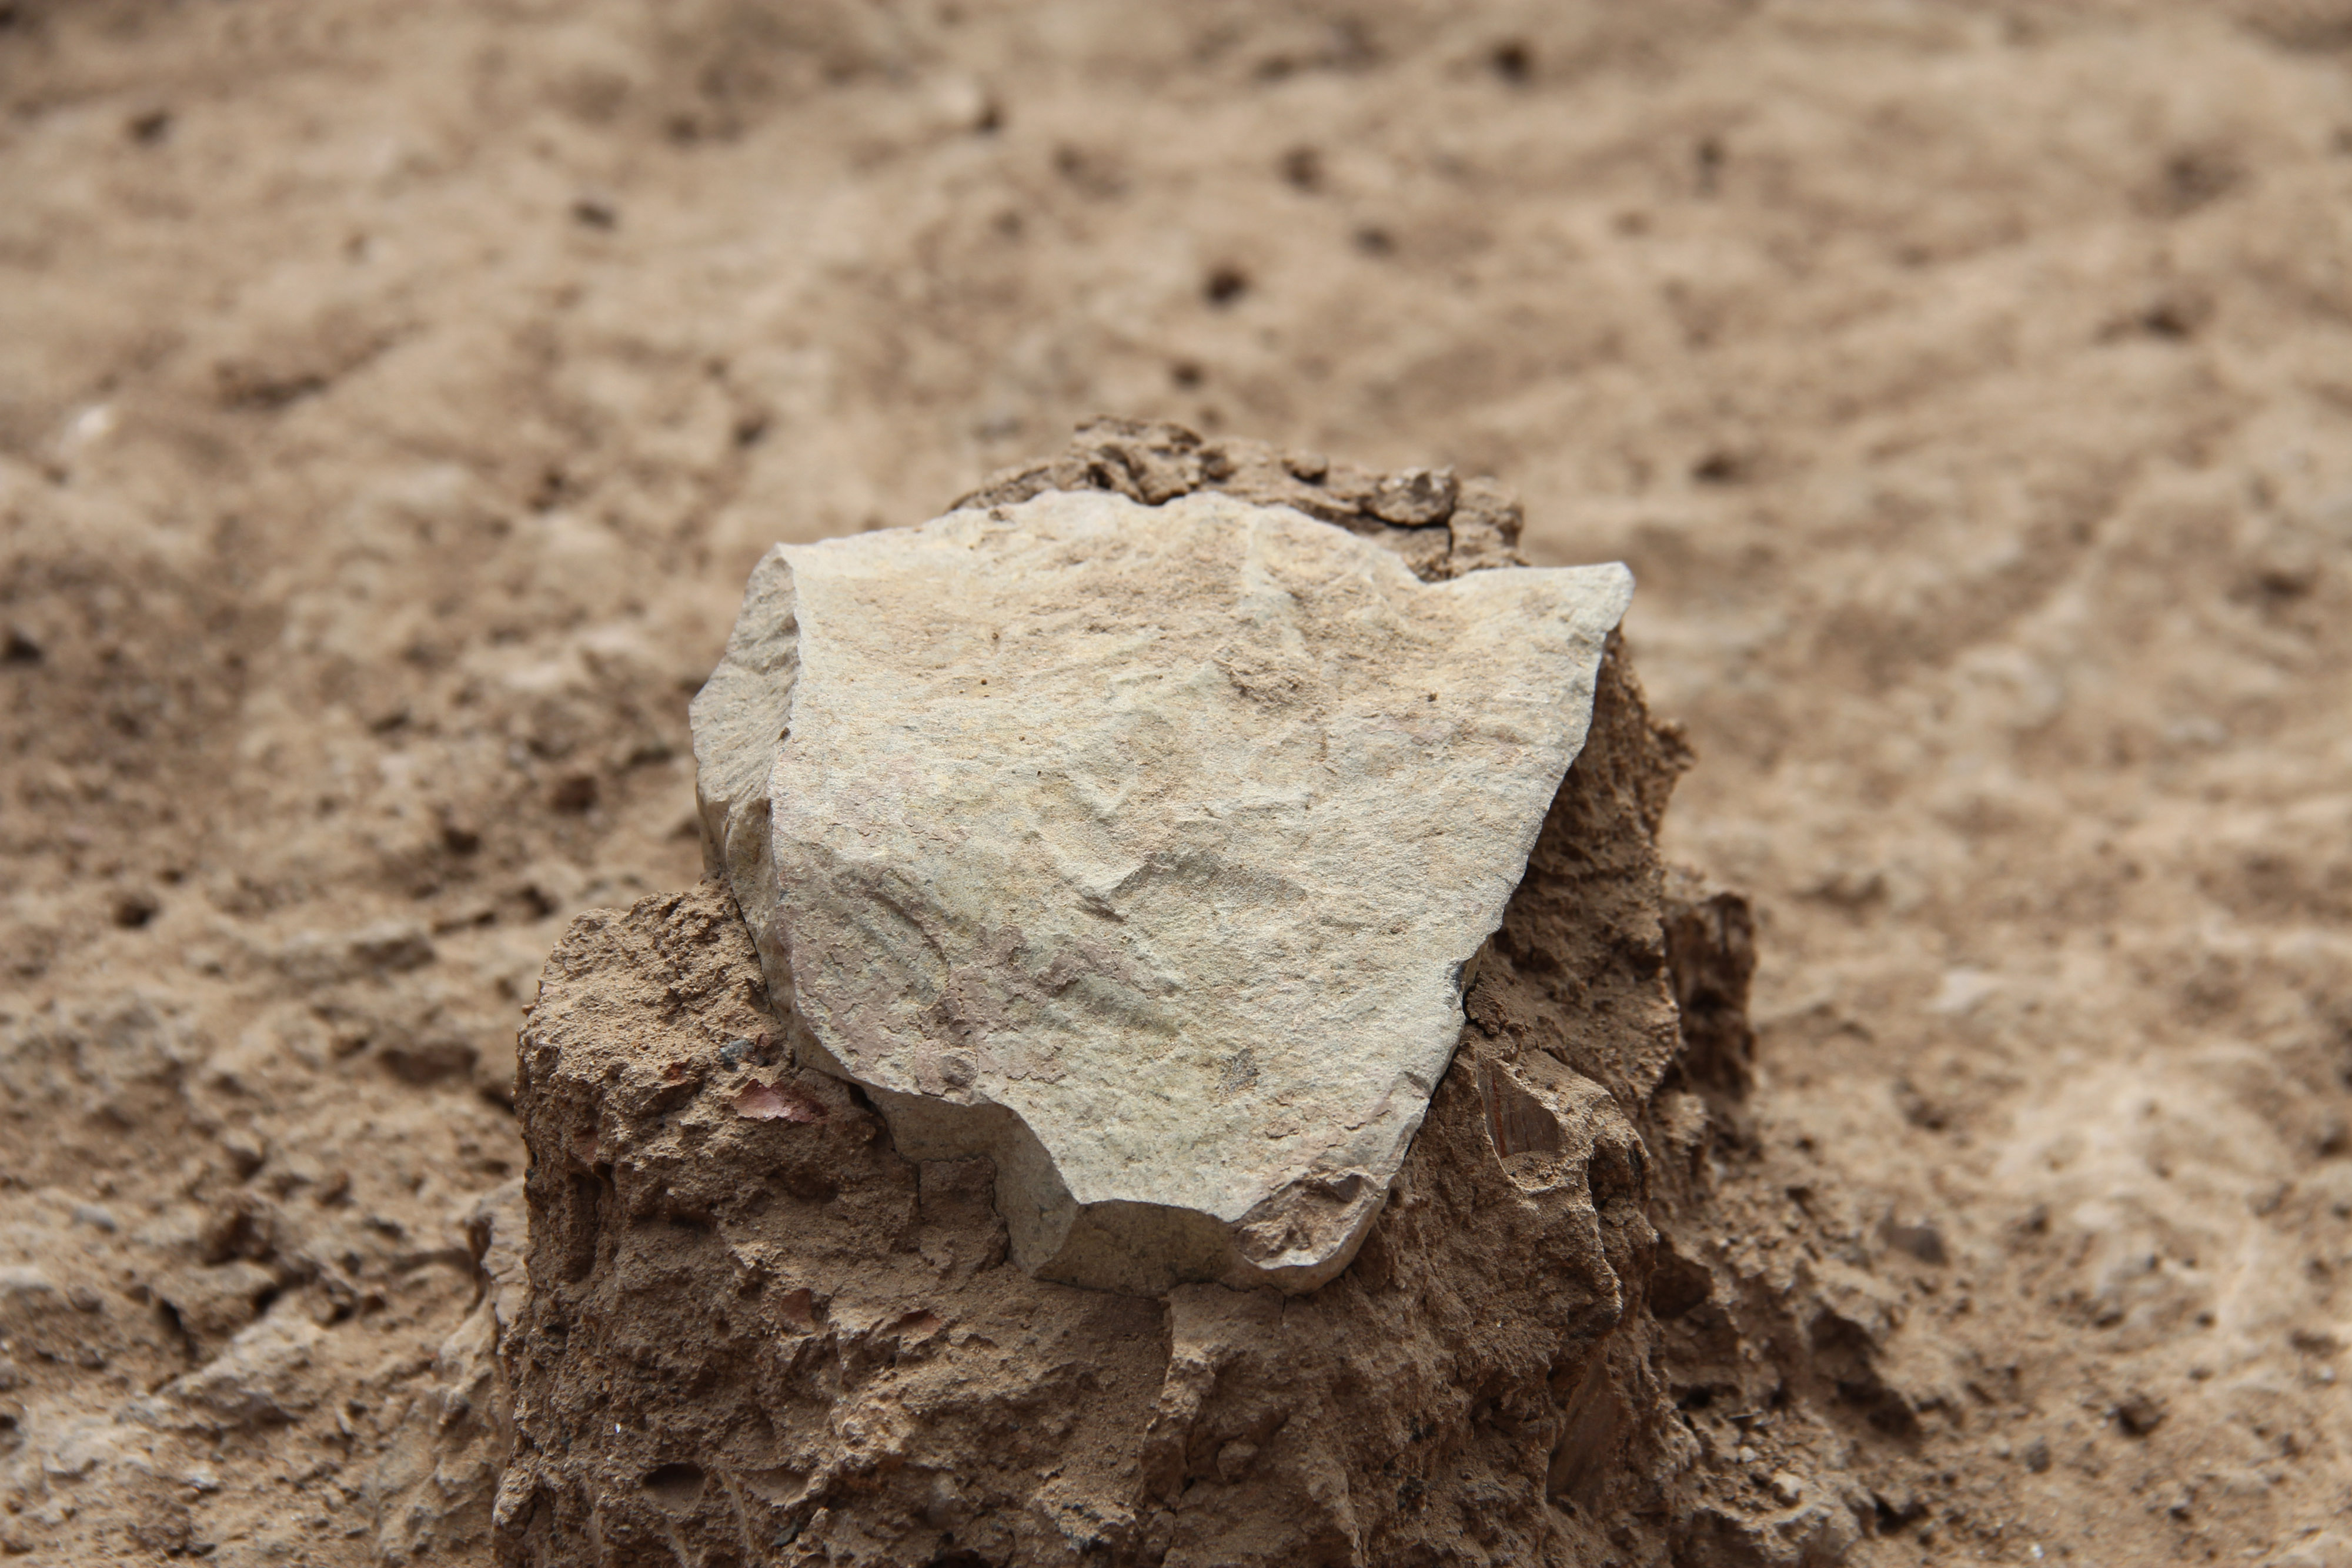 This undated photo made available May 20, 2015 by the Mission Prehistorique au Kenya - West Turkana Archaeological Project shows the excavation of a stone tool found in the West Turkana area of Kenya. (MPK-WTAP/AP)